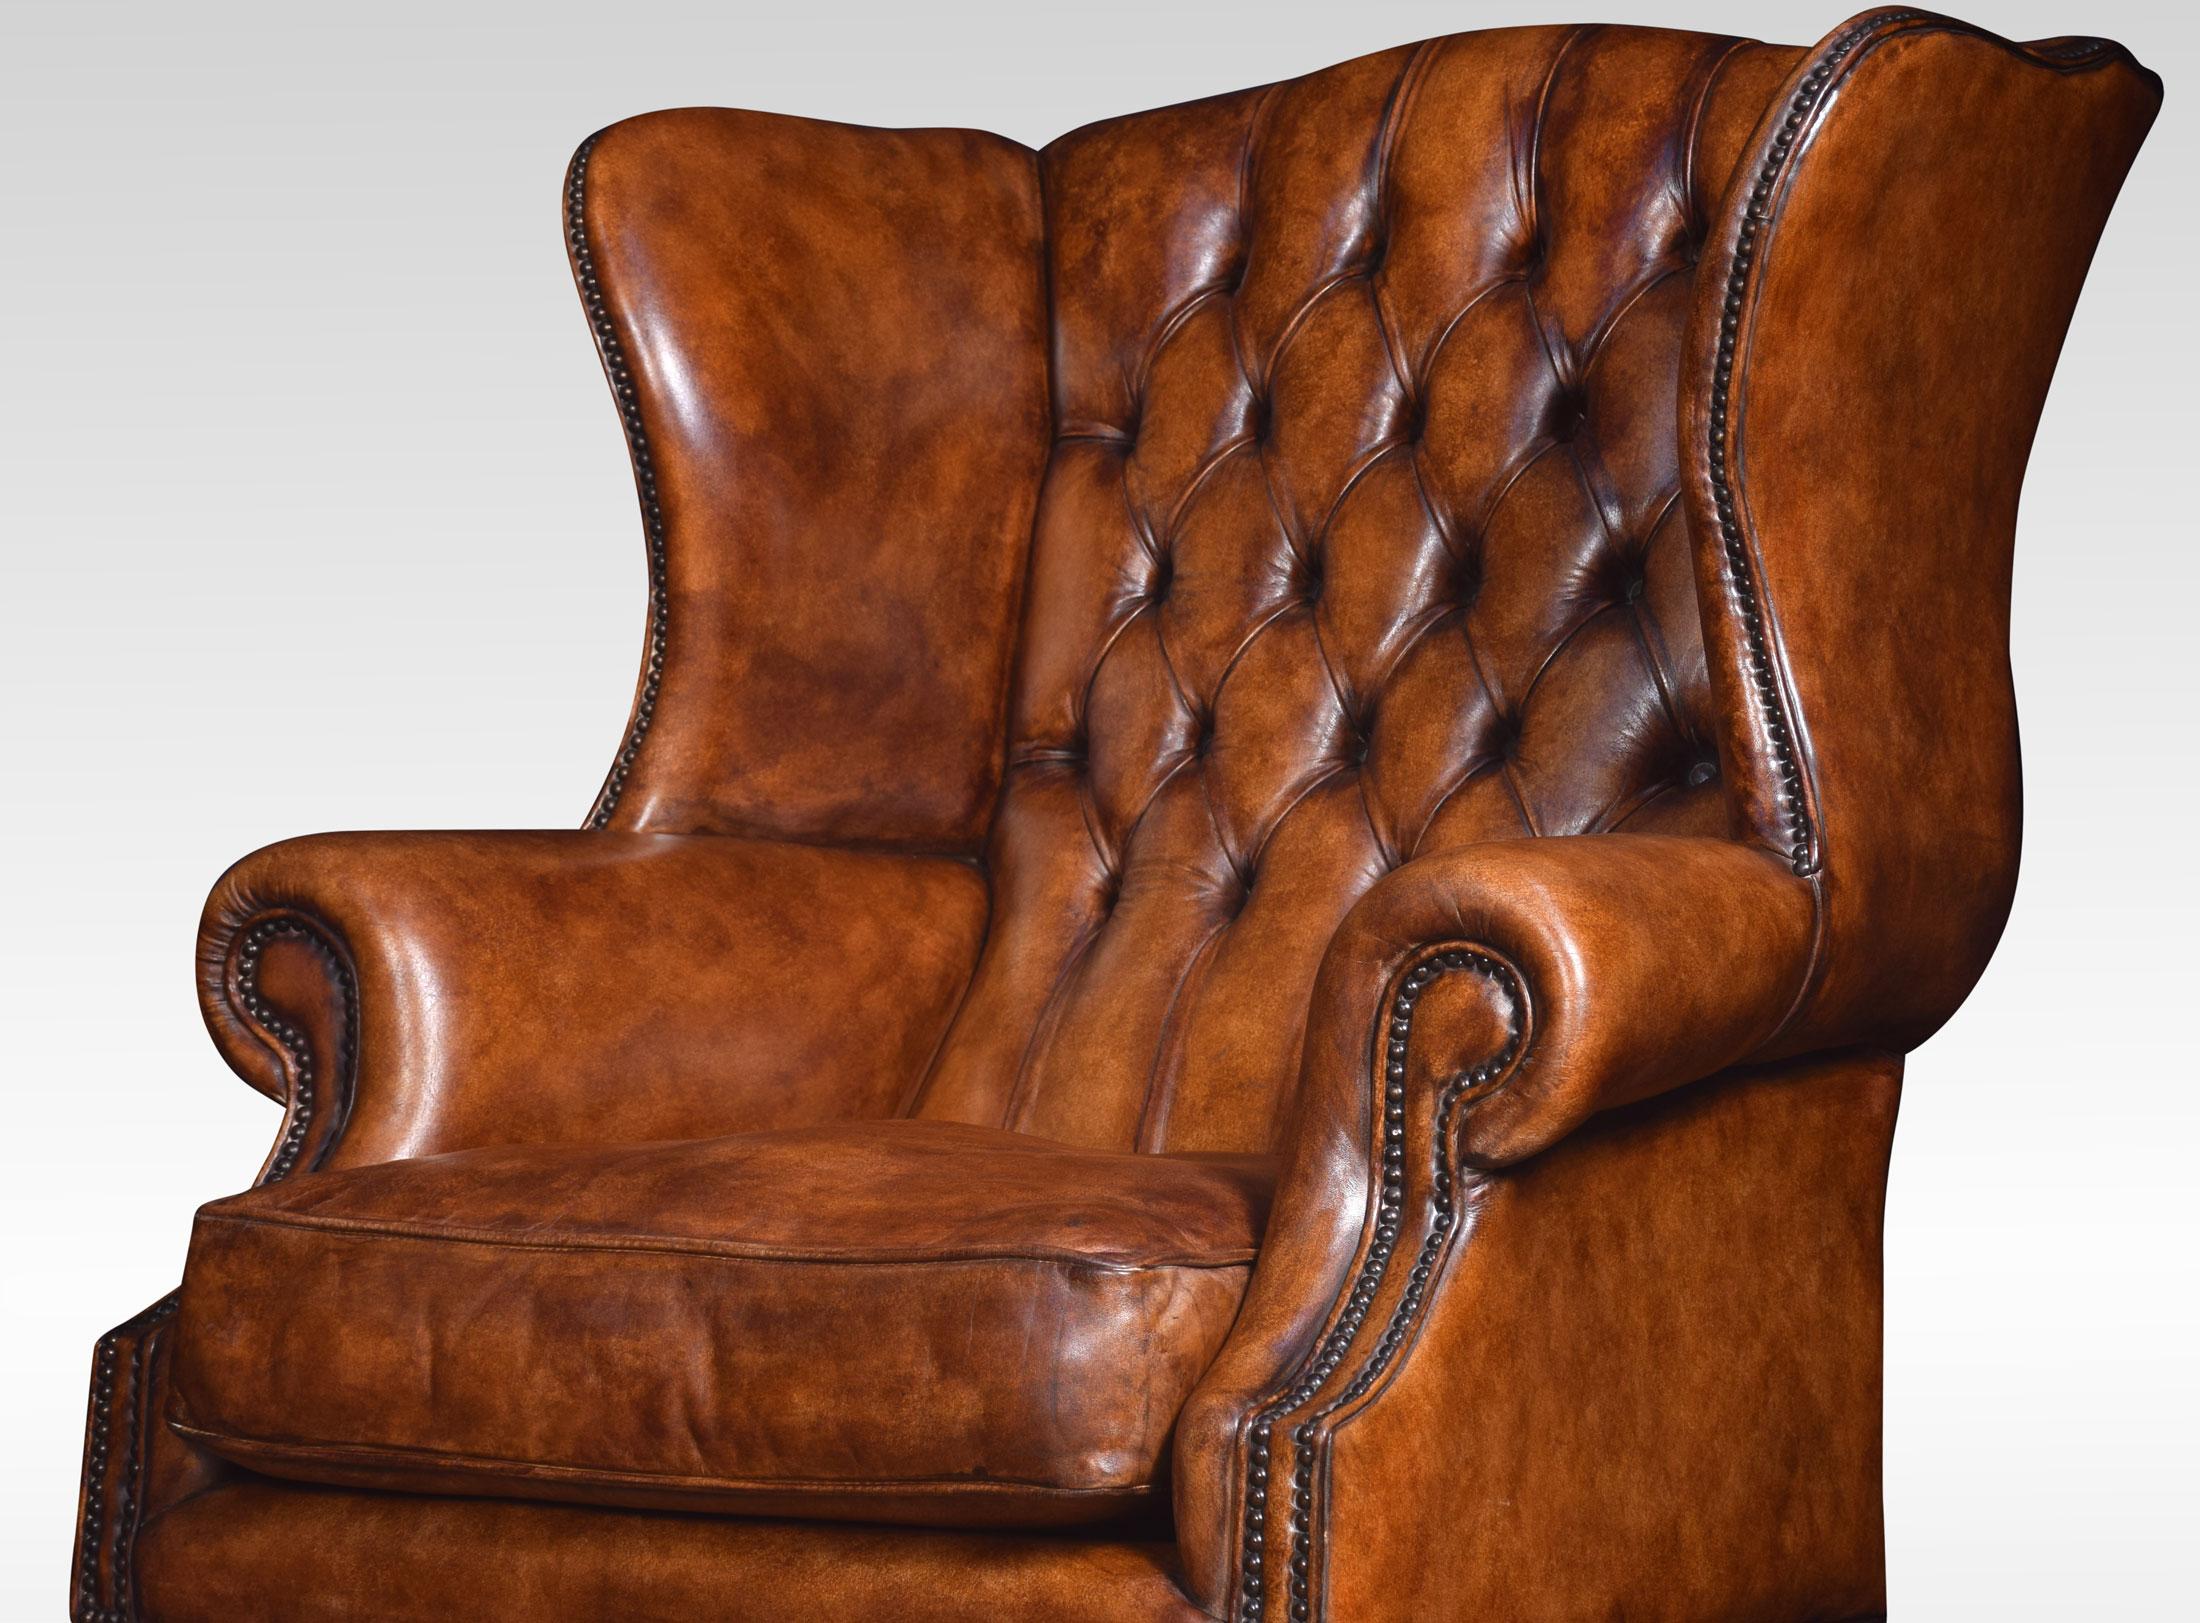 Pair of mahogany framed wing armchairs of generous proportions, the arched top above deep buttoned back, upholstered arms and seat in brown leather. All raised up on square supports united by a stretcher
Dimensions:
Height 49 inches height to seat